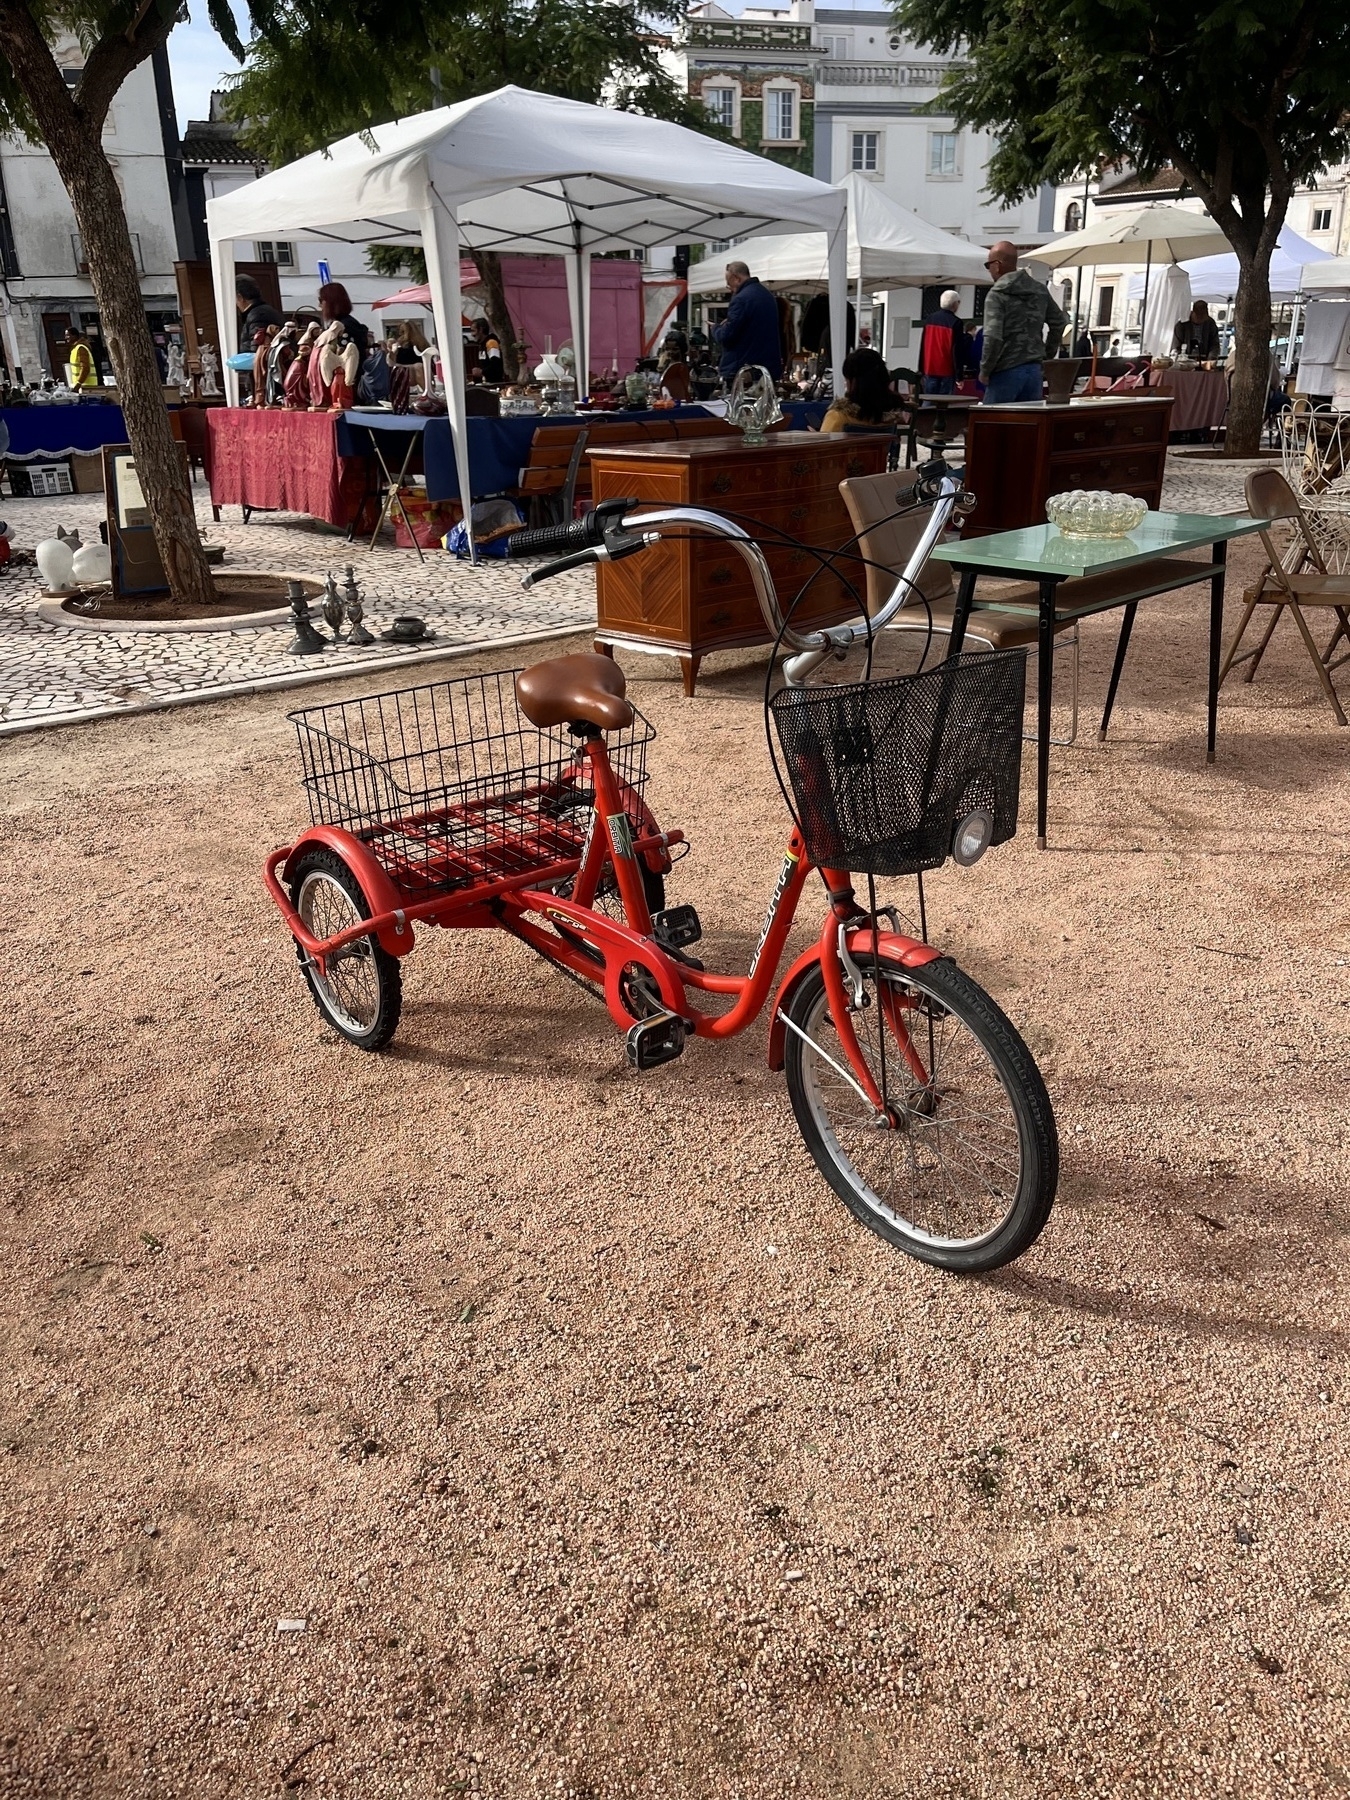 A red tricycle